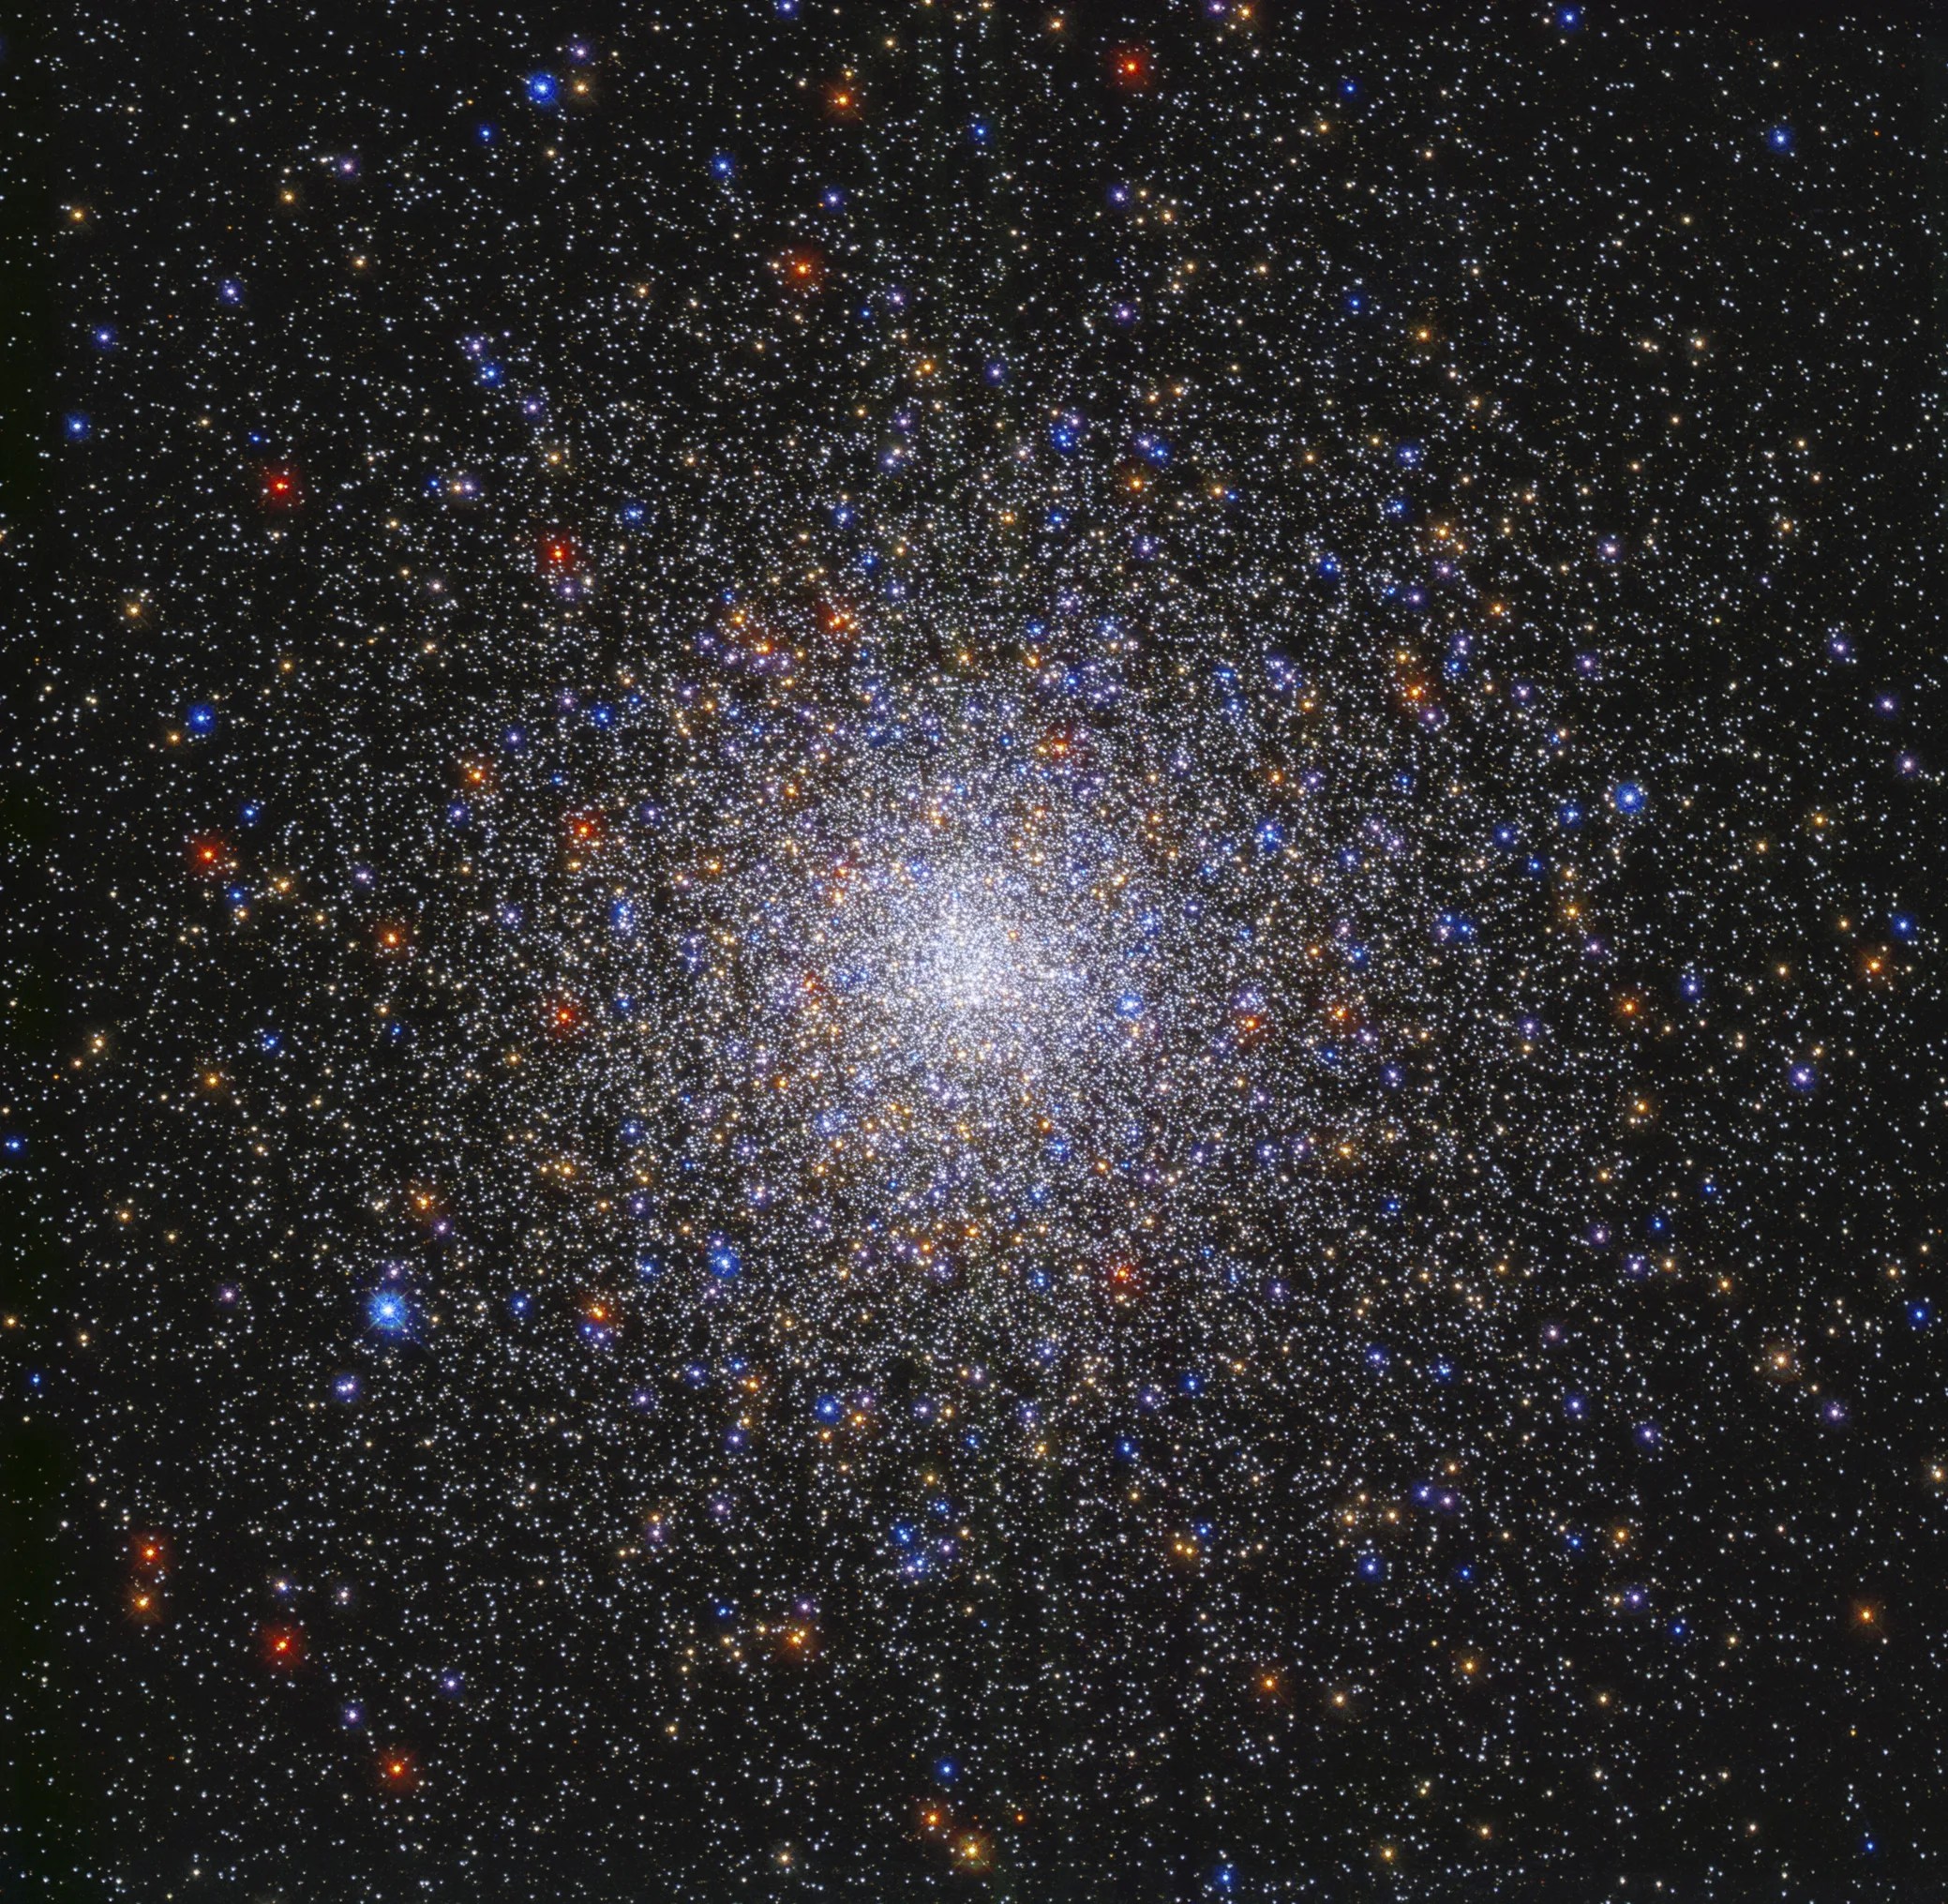 Image center holds a dense sphere of stars in colors of red, orange, yellow, white, and blue. The stars are densely packed at image center and taper out toward the image's edges. They are on a black background.